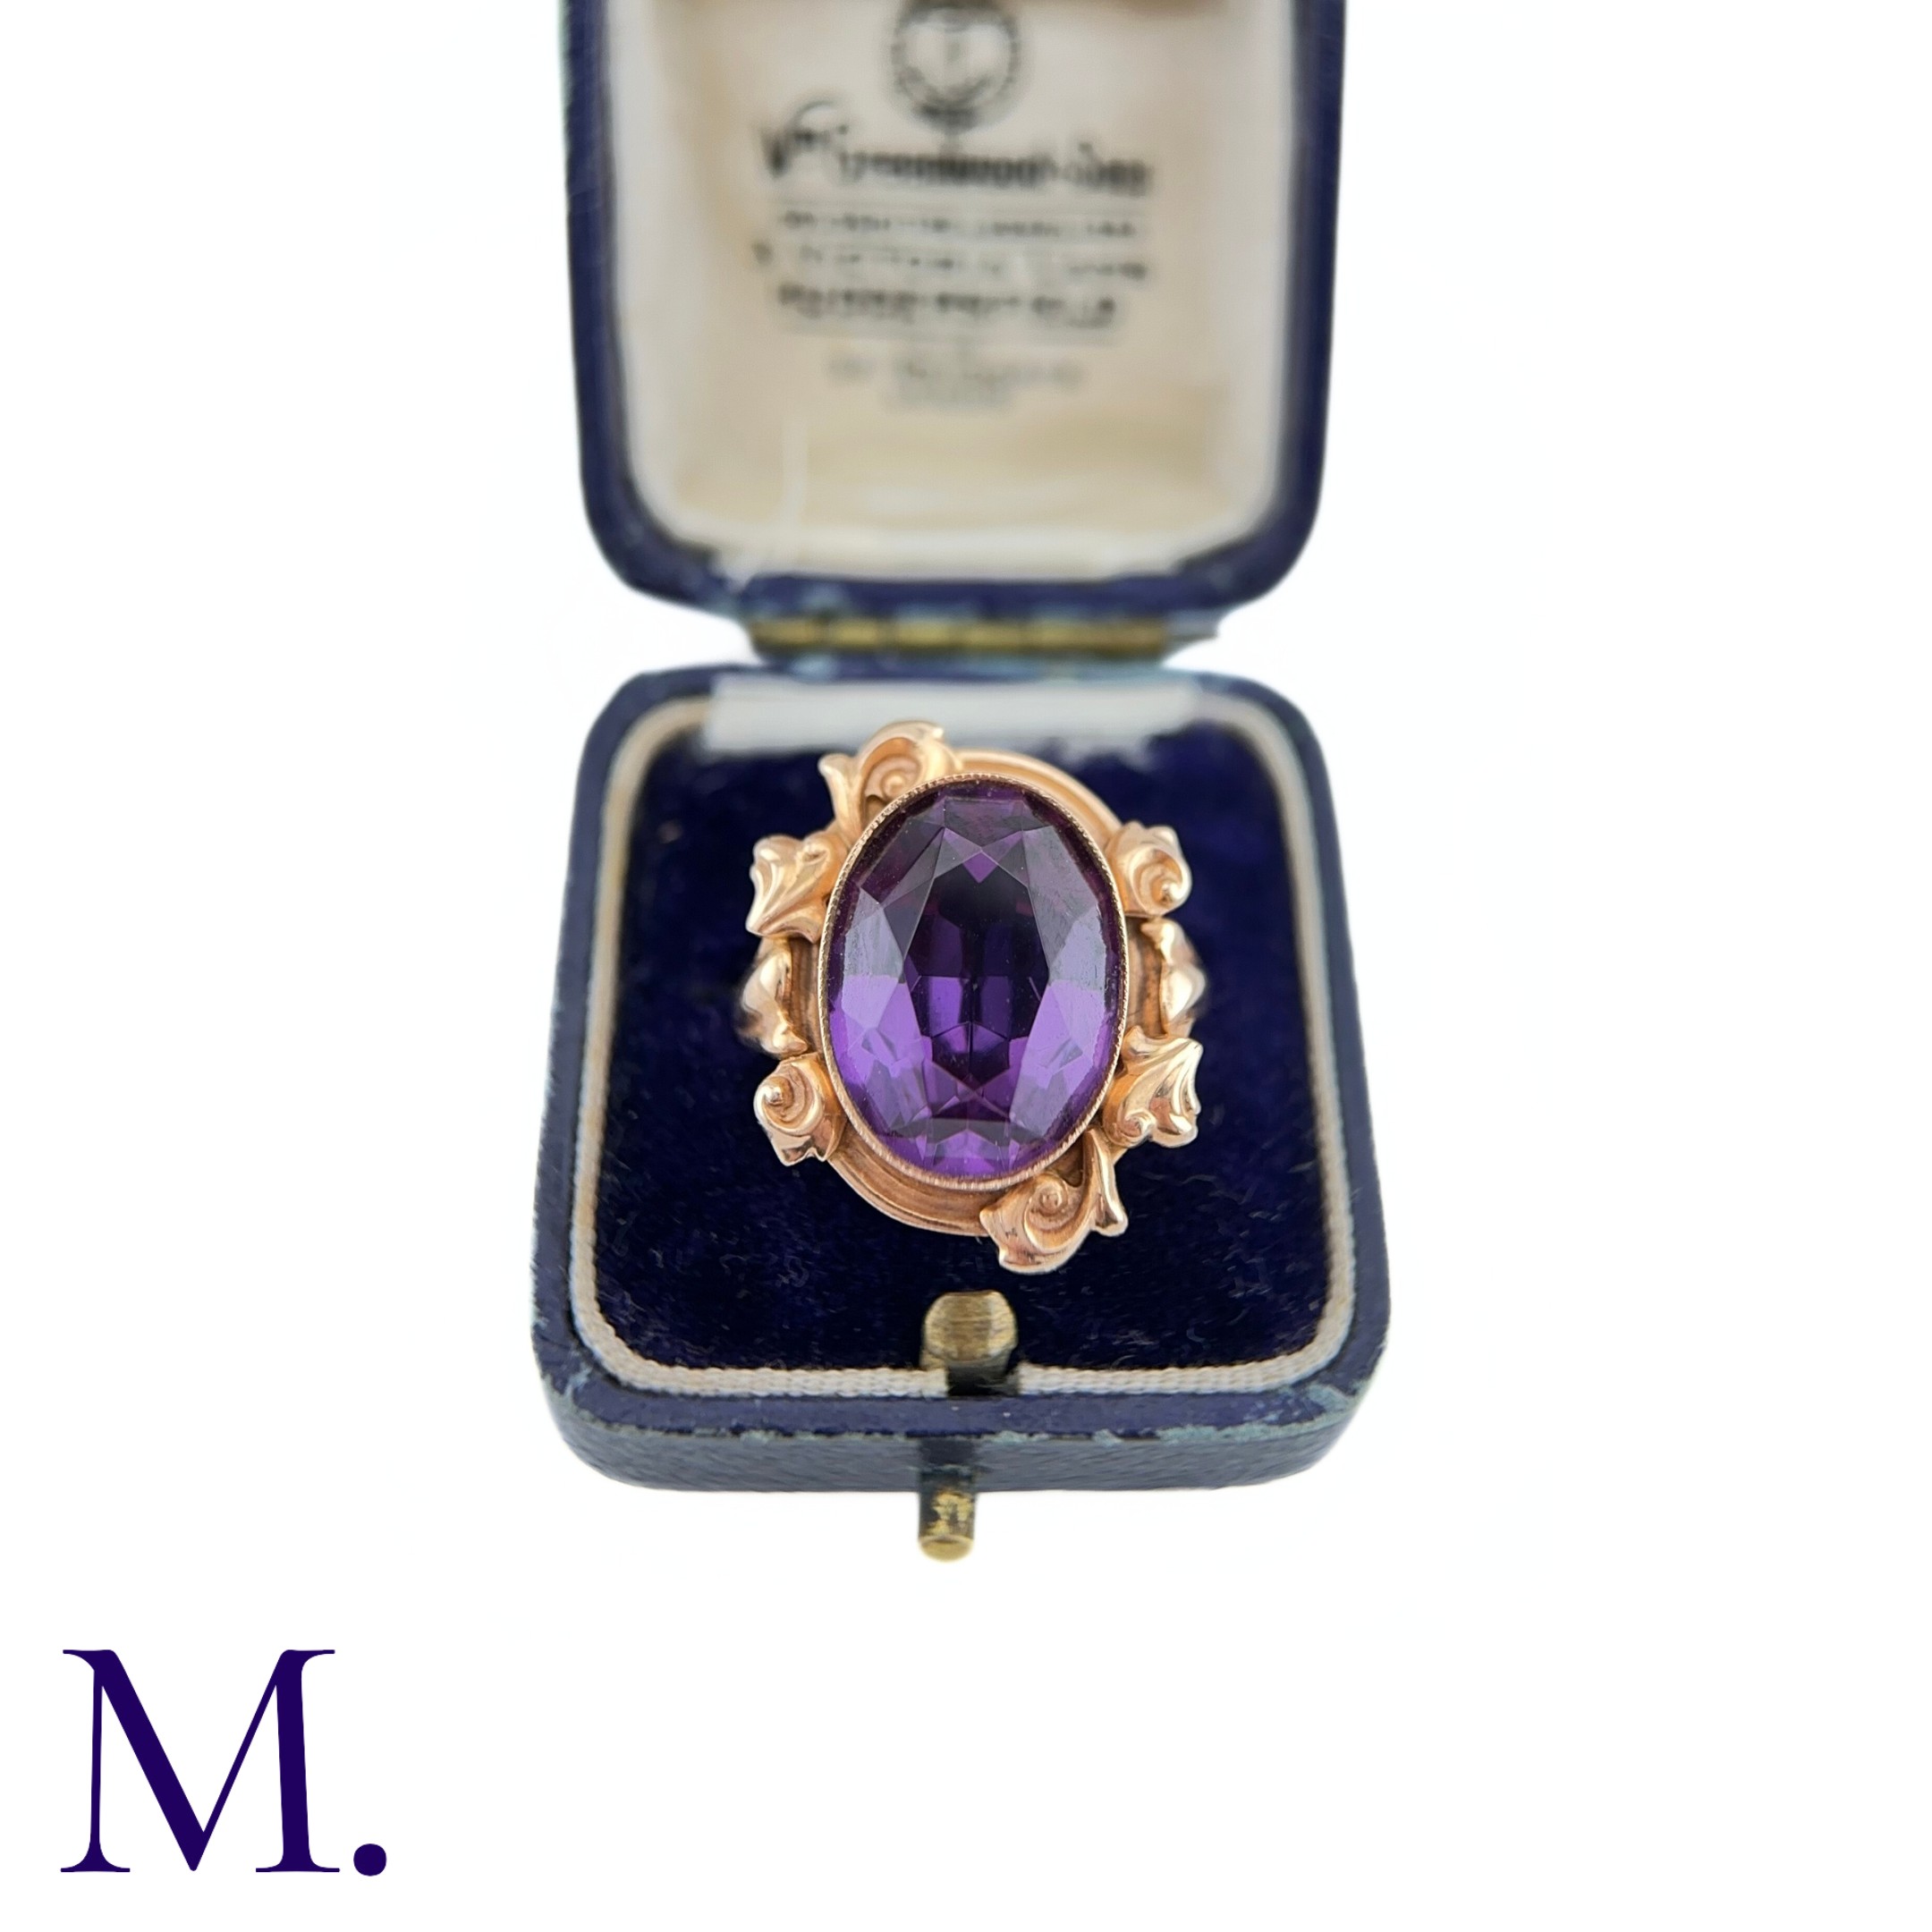 A Russian Purple Sapphire Ring The 14ct rose gold ring, with Russian hallmarks, is set with a - Image 6 of 6